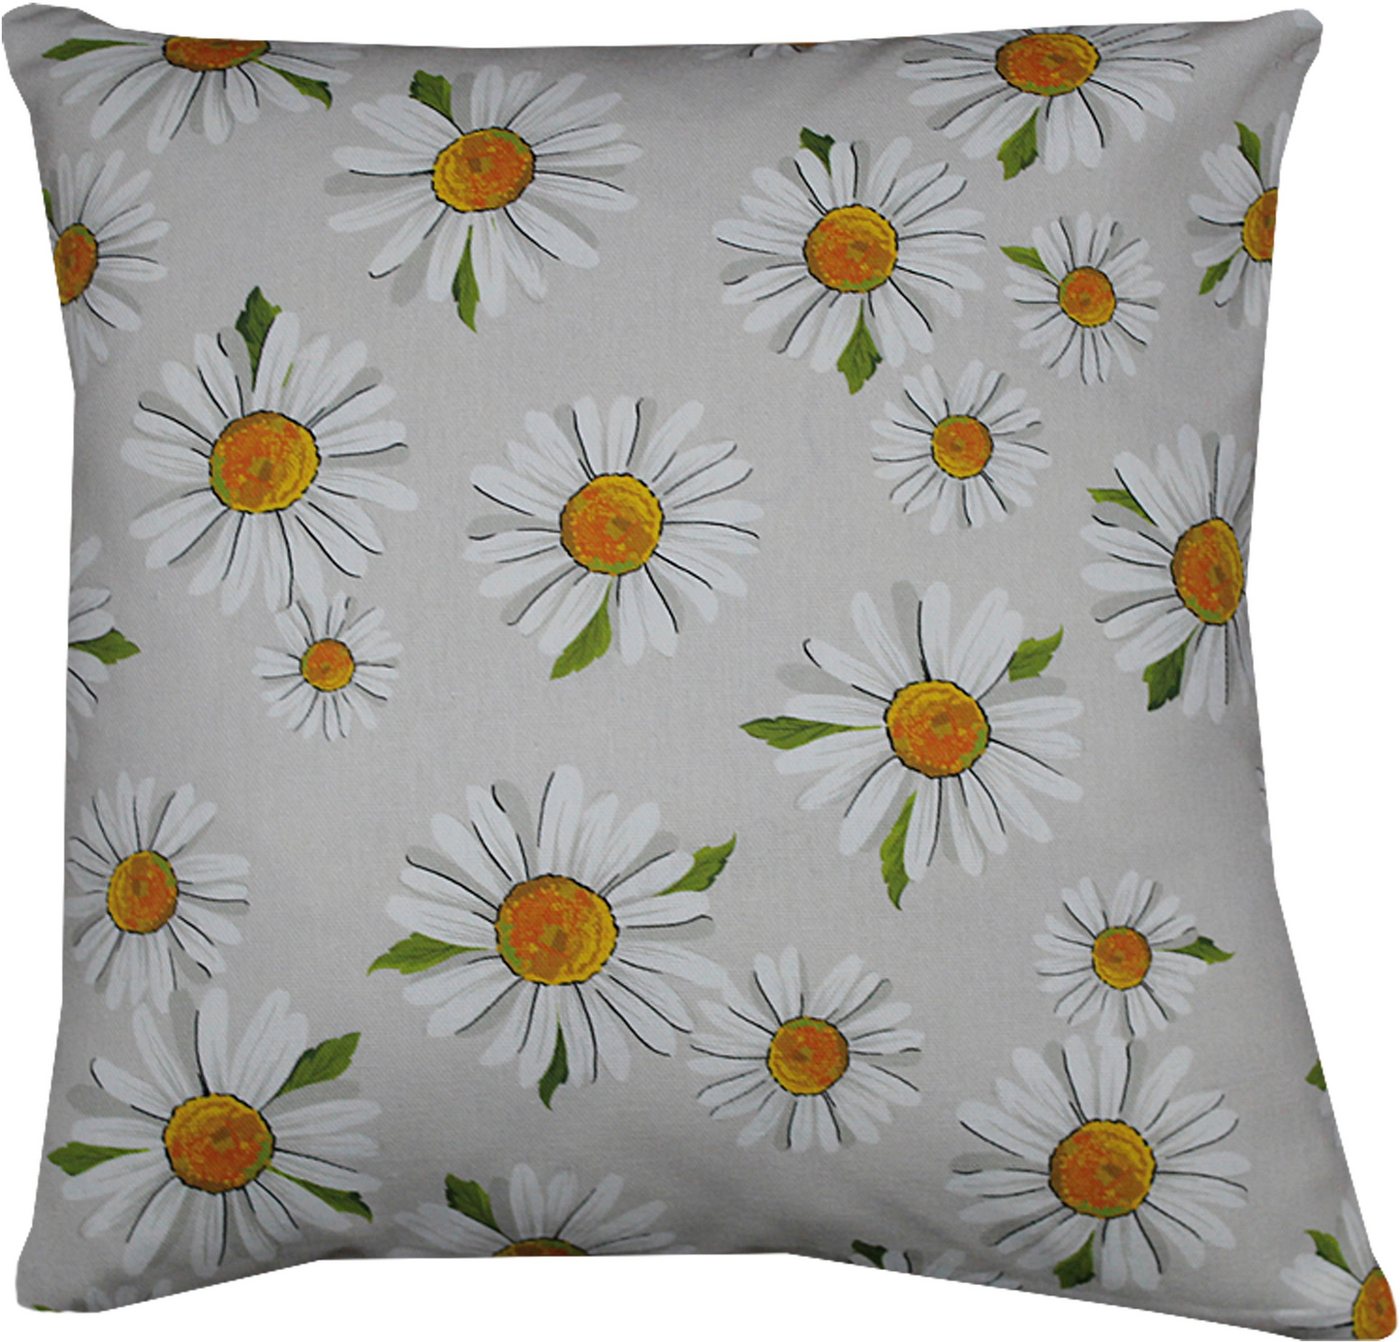 Kissenhülle Daisies, HOSSNER - HOMECOLLECTION (1 Stück) von HOSSNER - HOMECOLLECTION